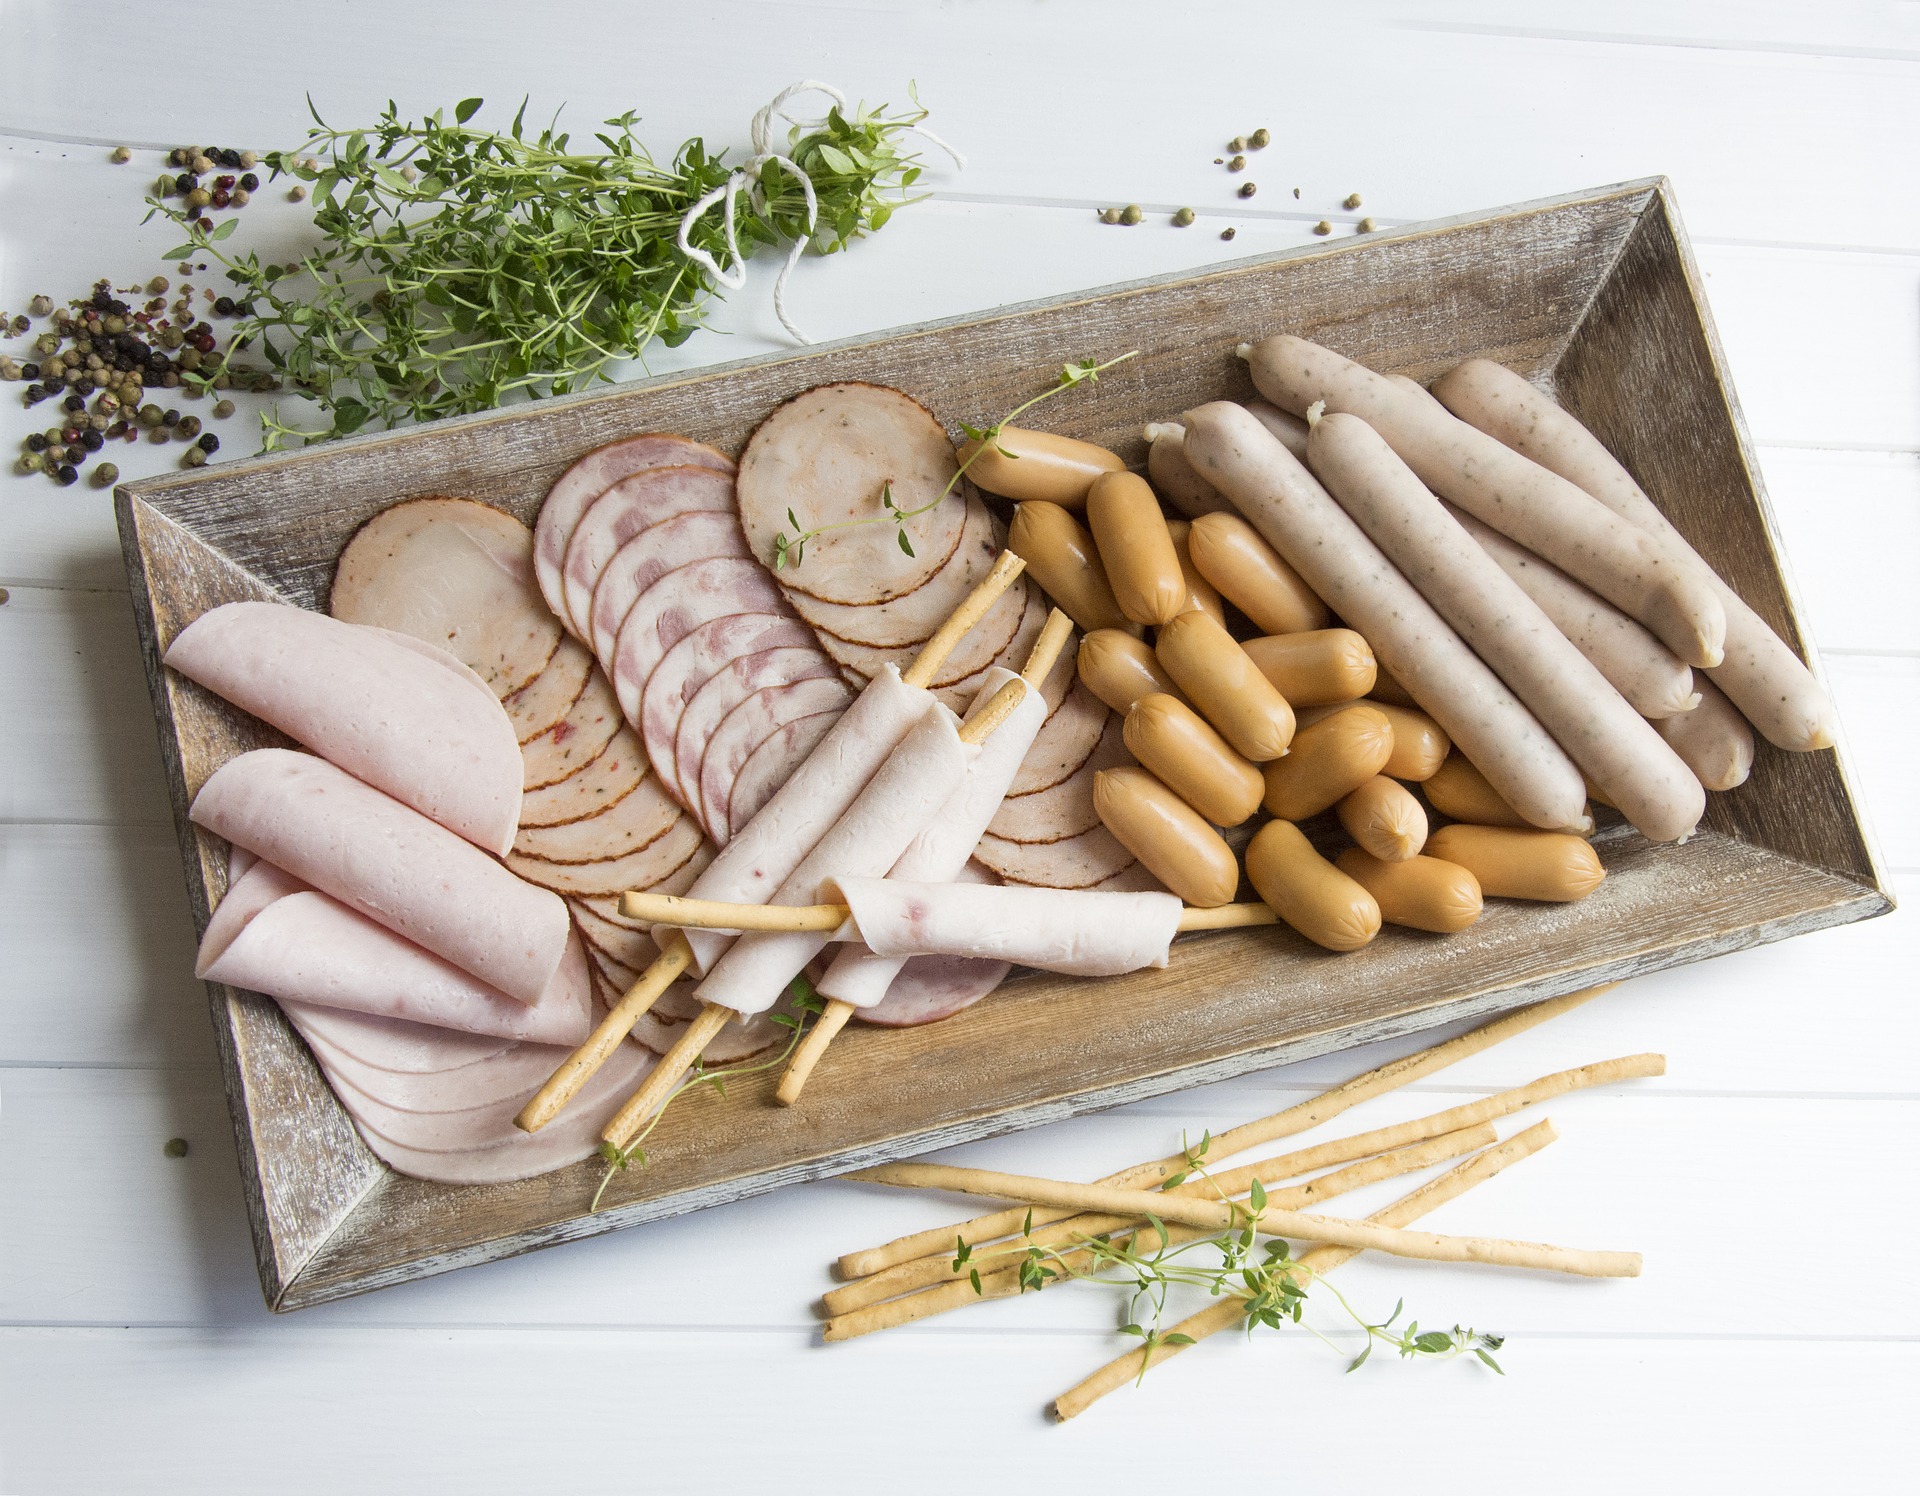 Nitrite in processed meat can increase the risk of cancer